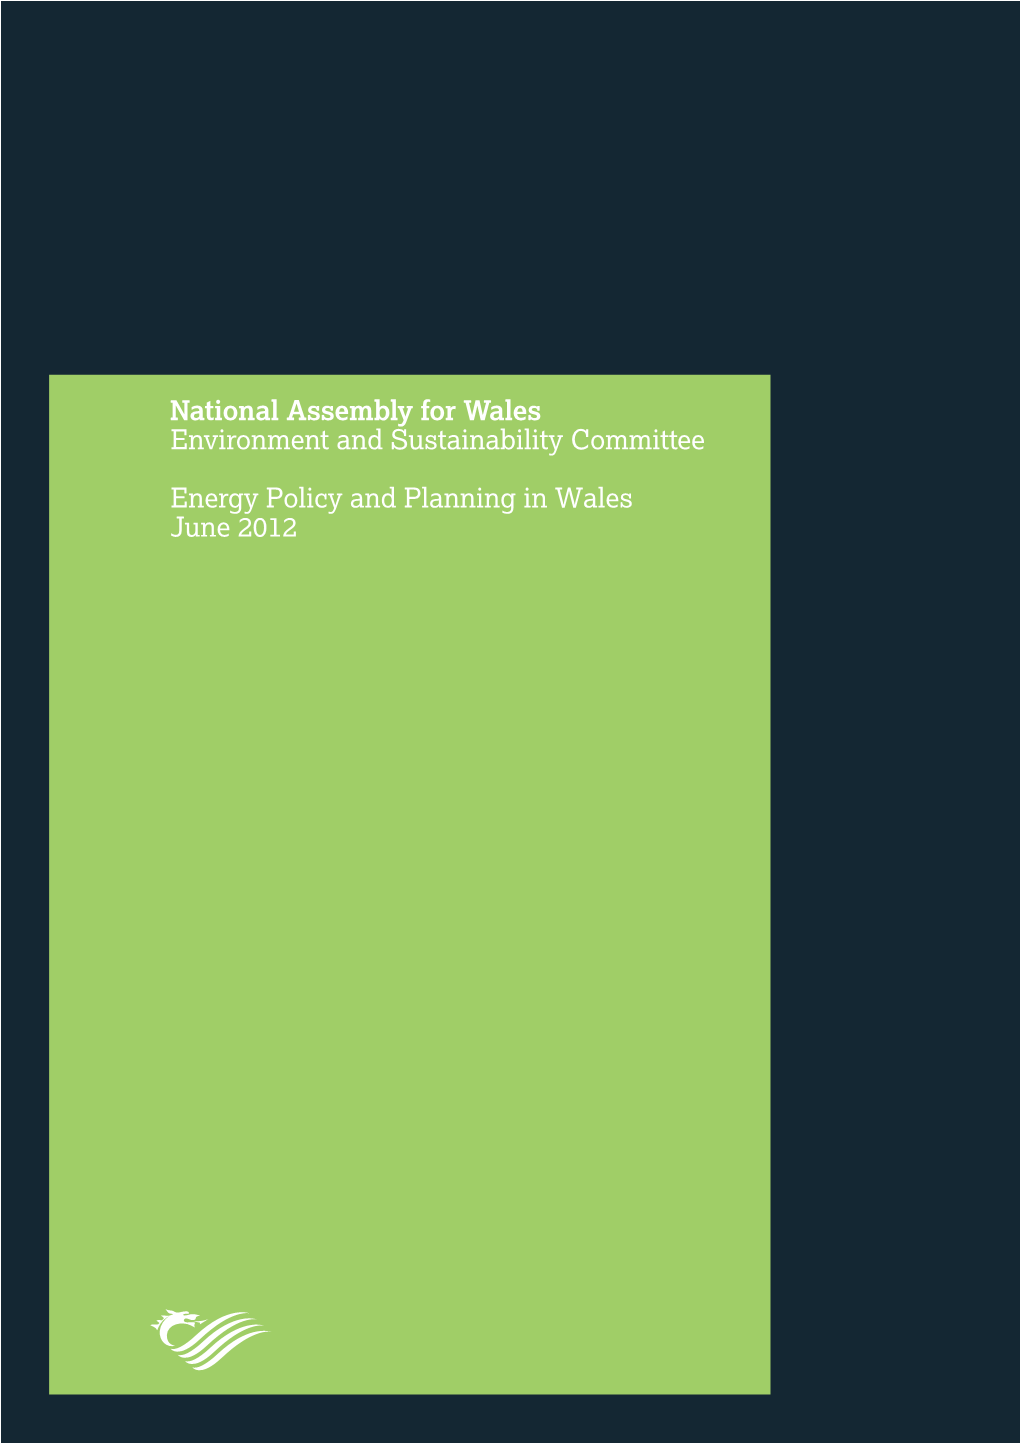 Energy Policy and Planning in Wales, National